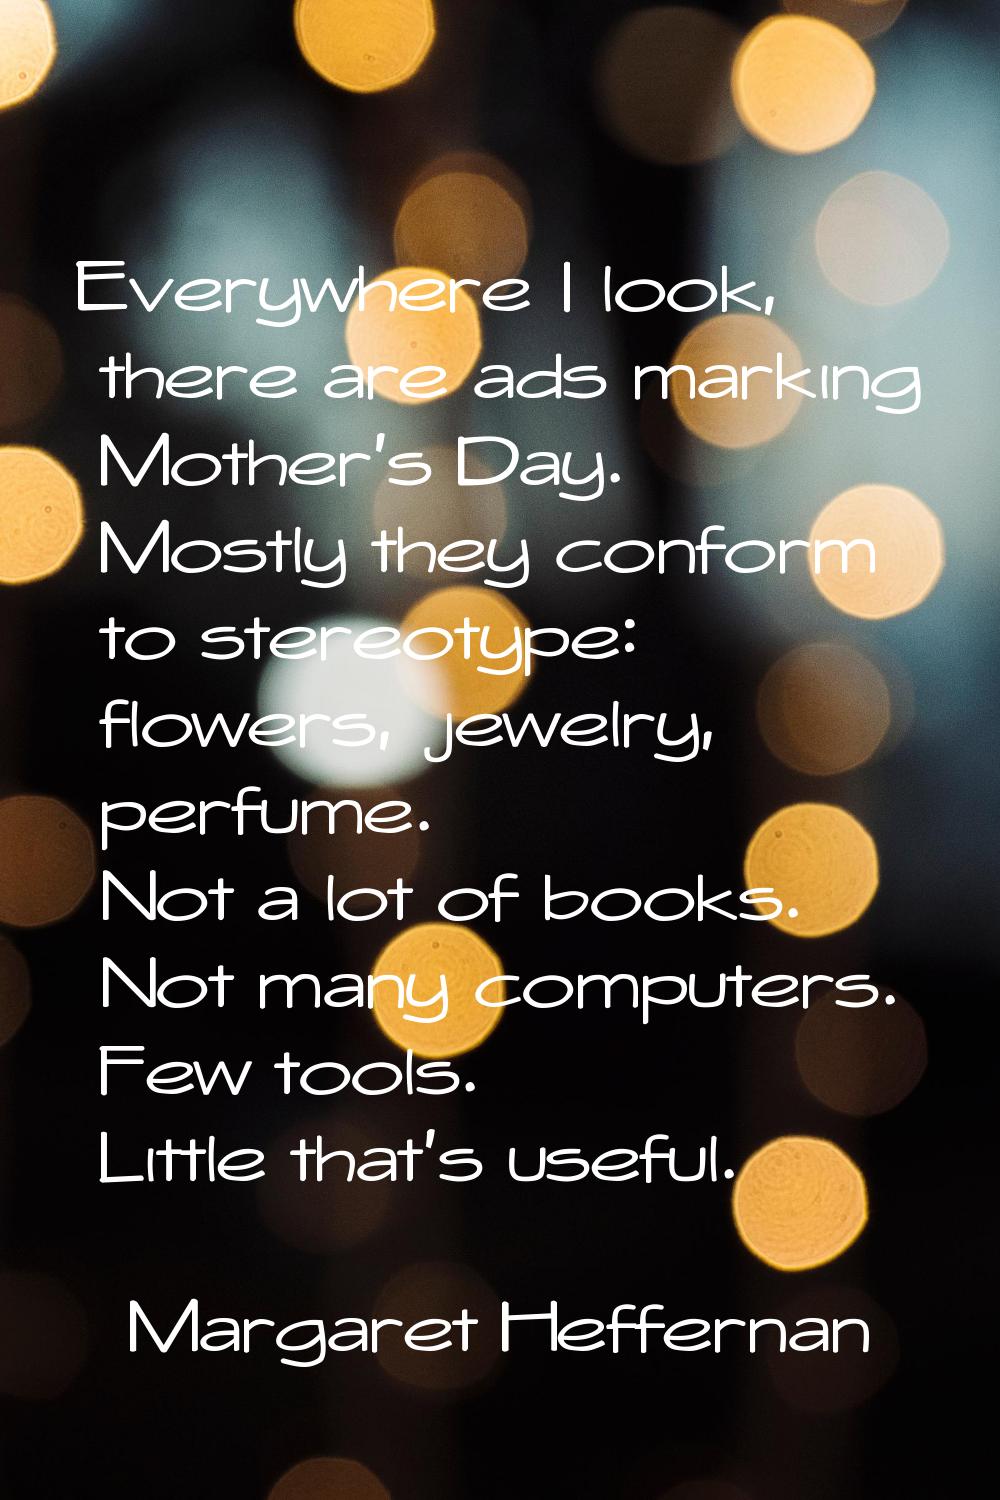 Everywhere I look, there are ads marking Mother's Day. Mostly they conform to stereotype: flowers, 